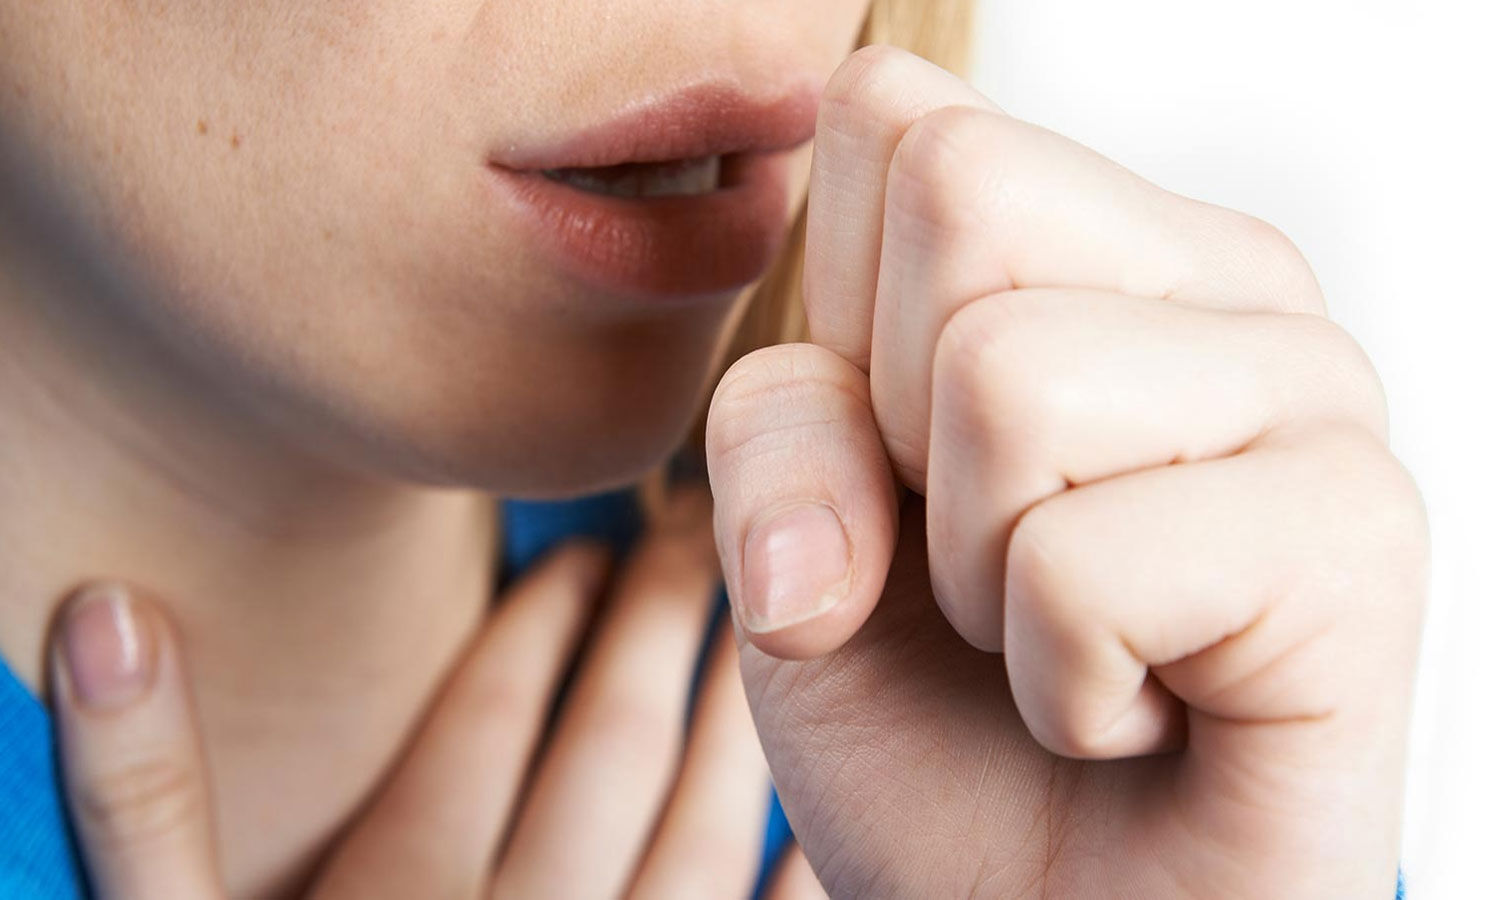 Merck Announces positive results for Gefapixant  Phase 3 Trial to treat Chronic Cough